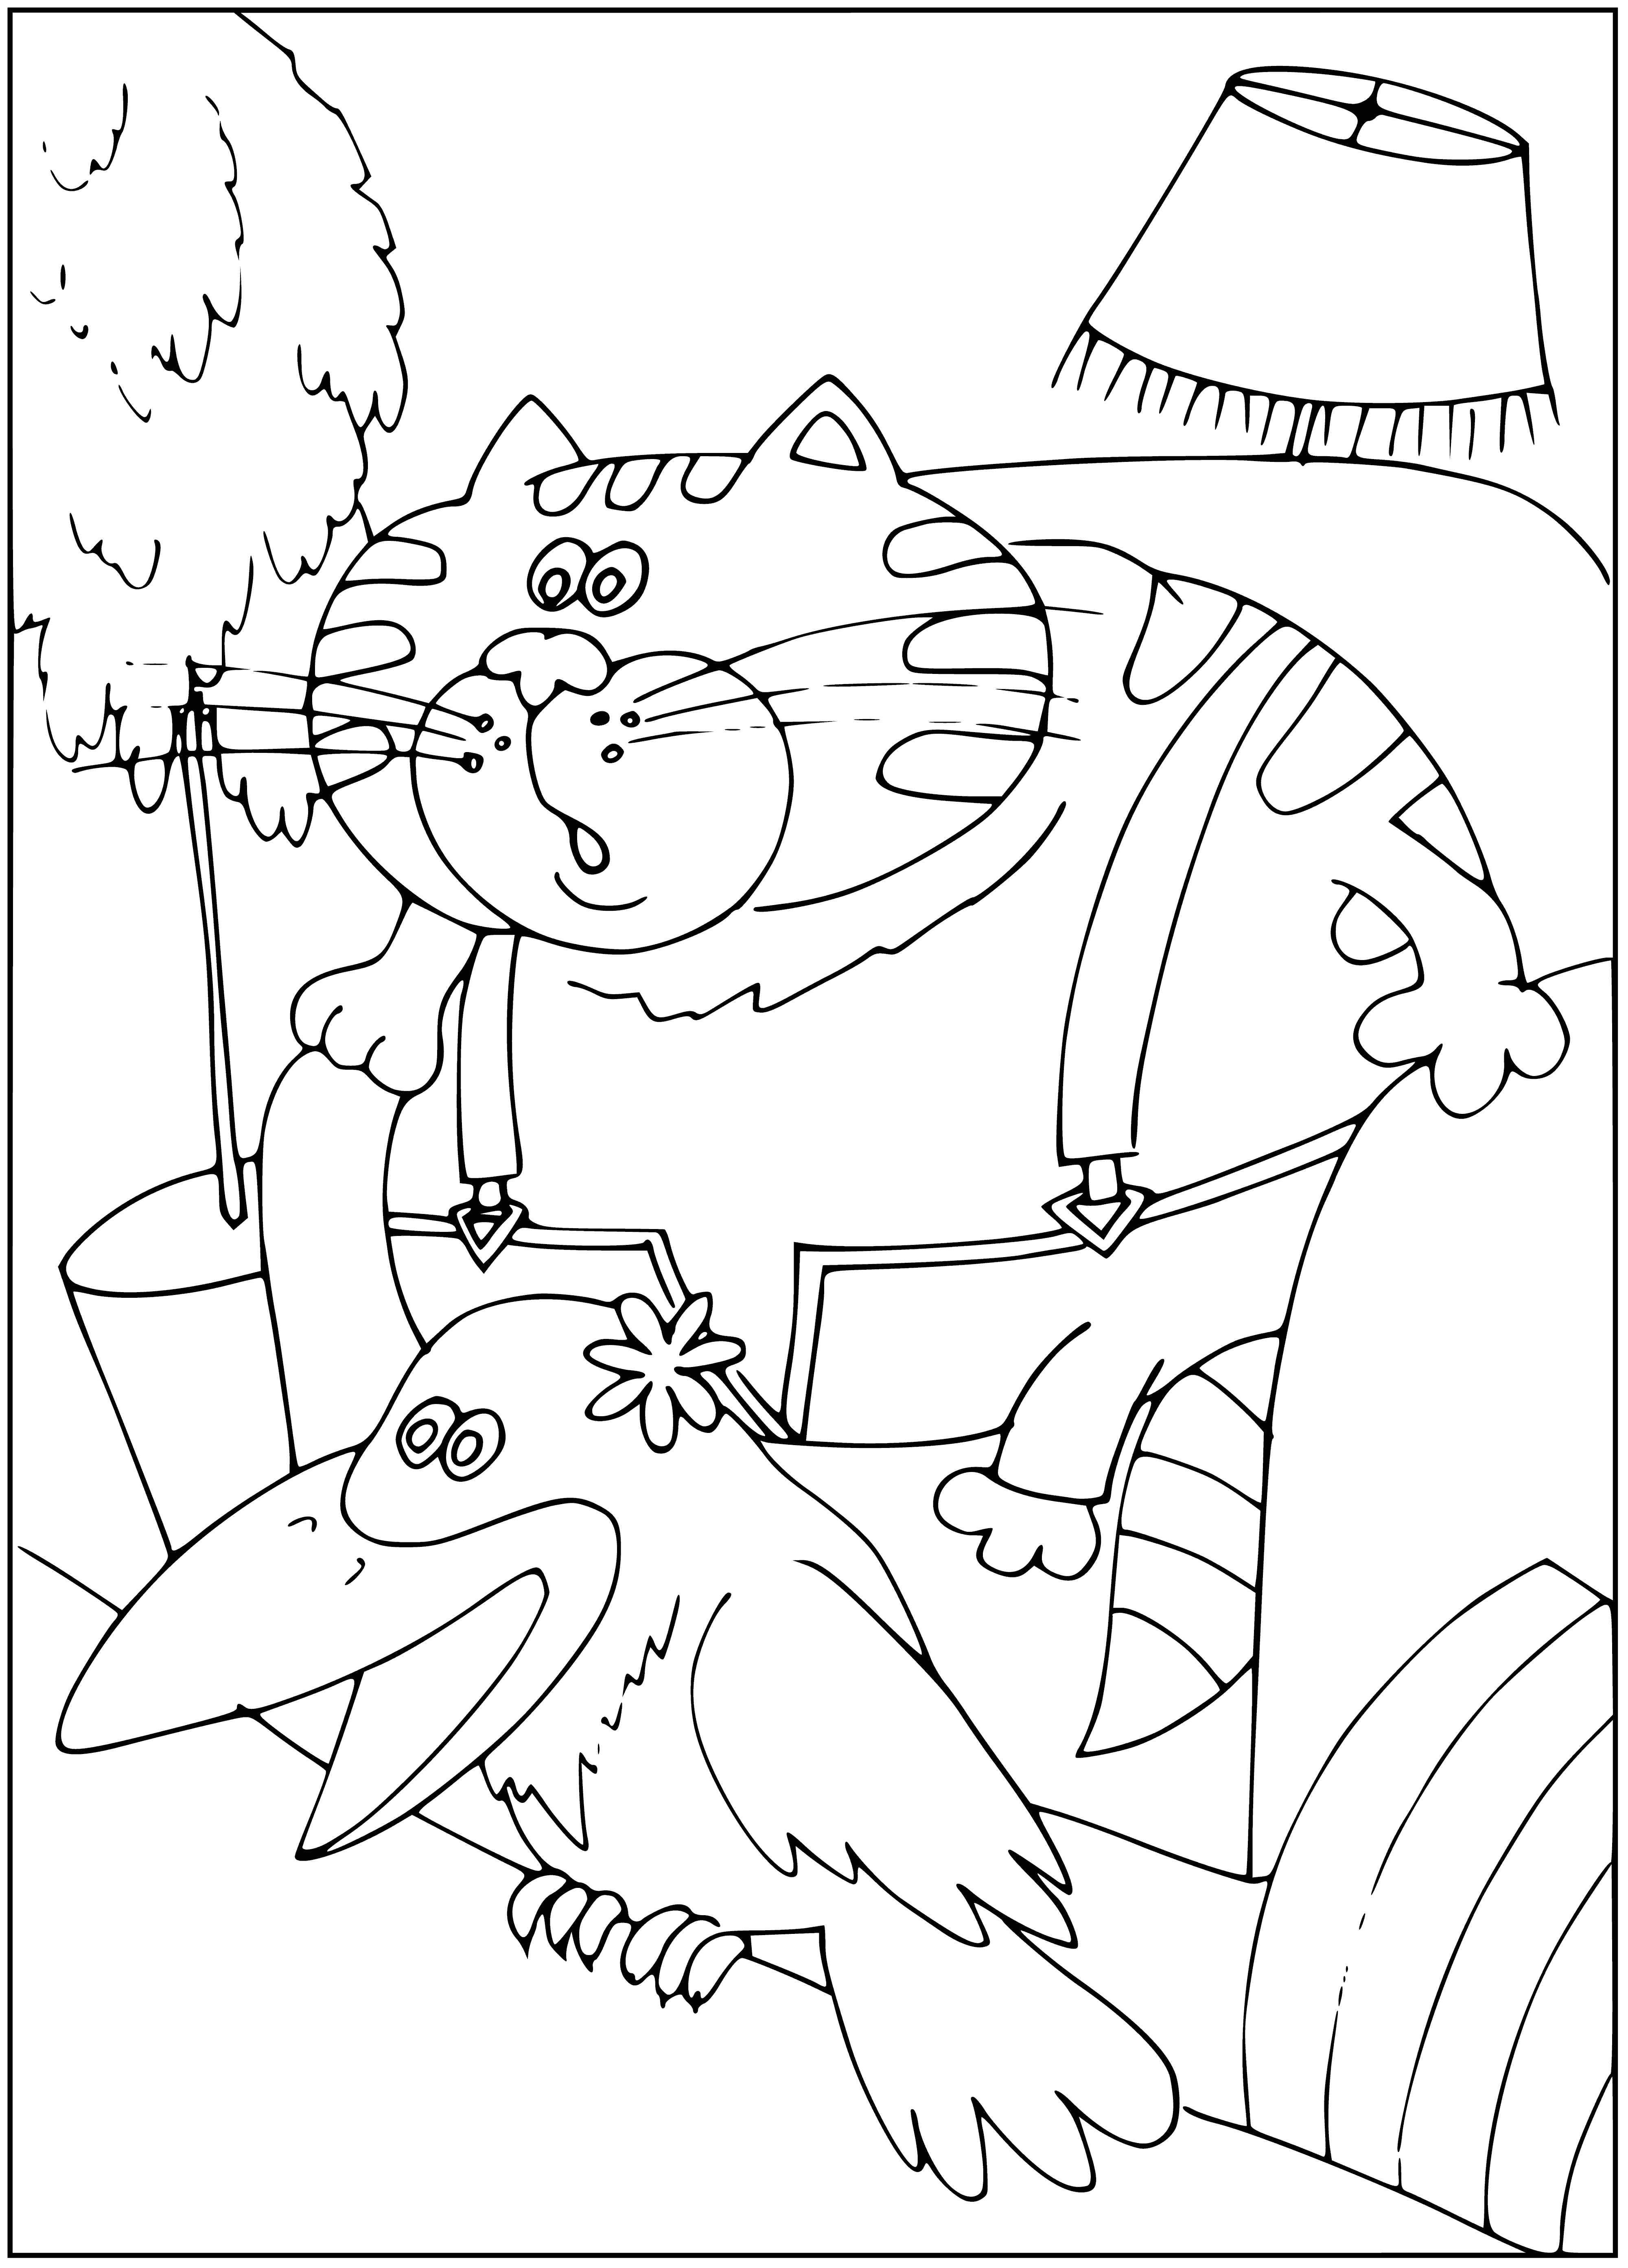 coloring page: A crow and a cat sit on a fence, smiling playfully. The crow waits with head tilted, and the cat's tail sways back and forth.